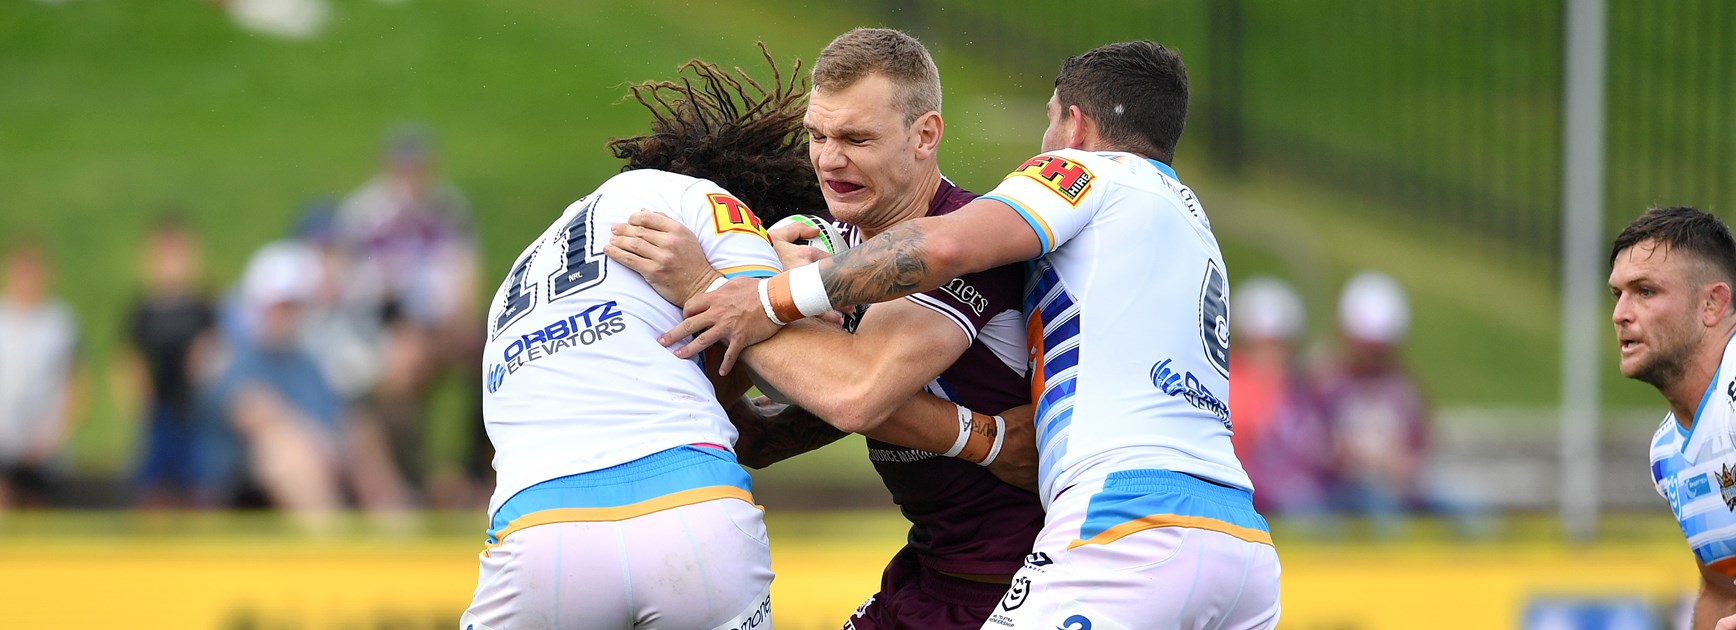 Everything you need to know about Sea Eagles-Titans match in Mudgee